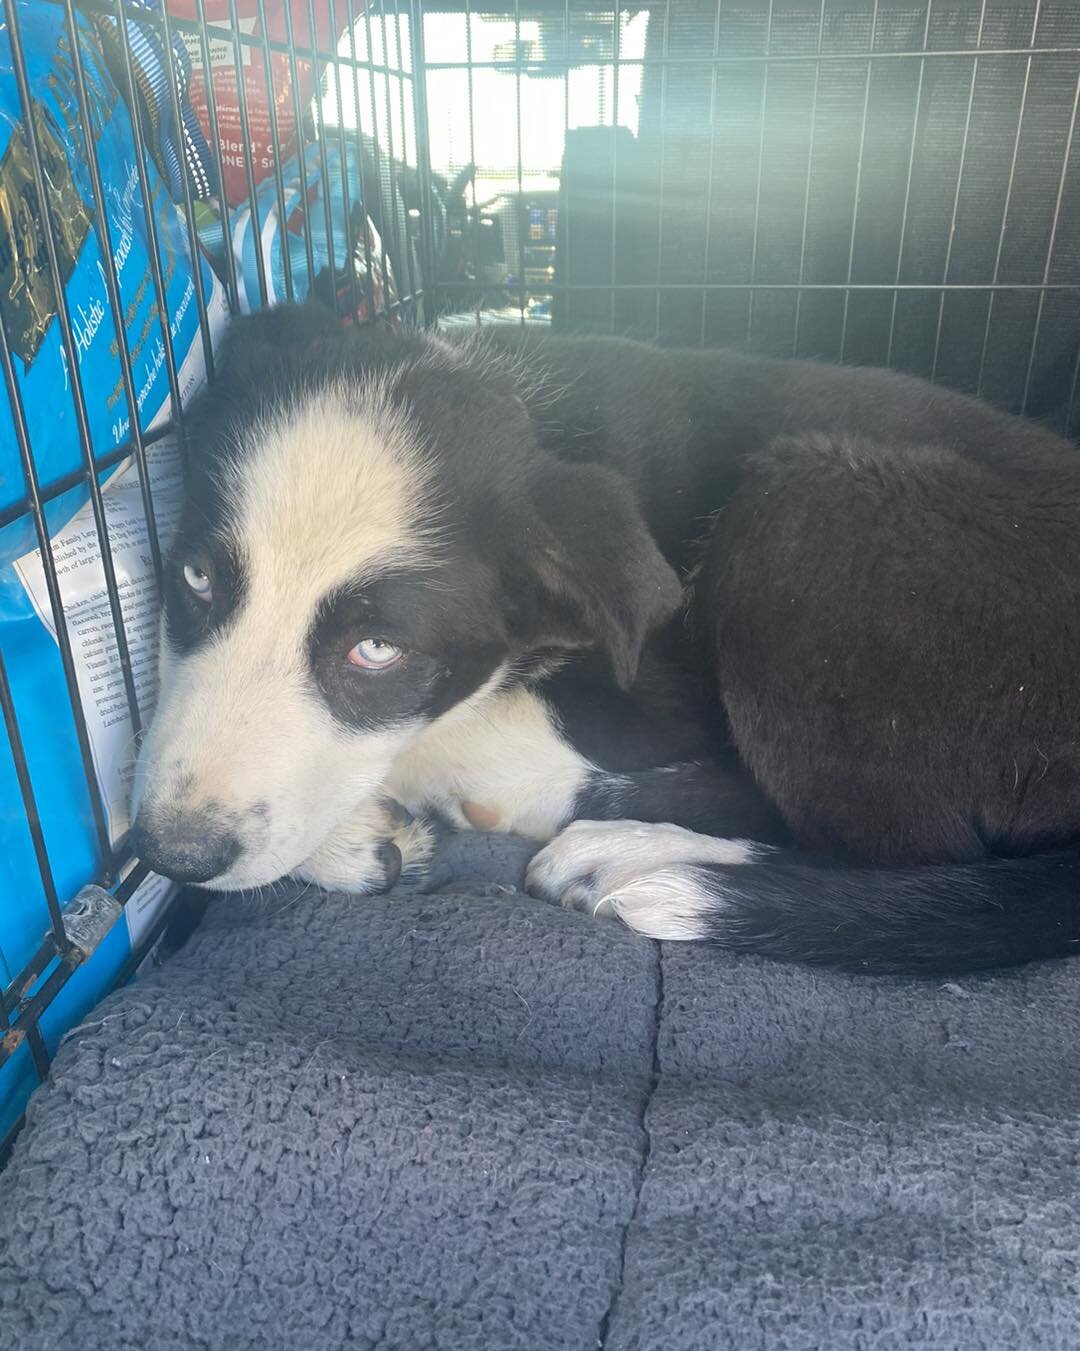 DONATIONS NEEDED
Yesterday we rescued a sweet puppy and shortly after discovered he has parvo - we caught it early, but without treatment he will die. We need your help! Saving him will cost us $4000-$6000 

Help us save Jake ❤️ any amount you can gi